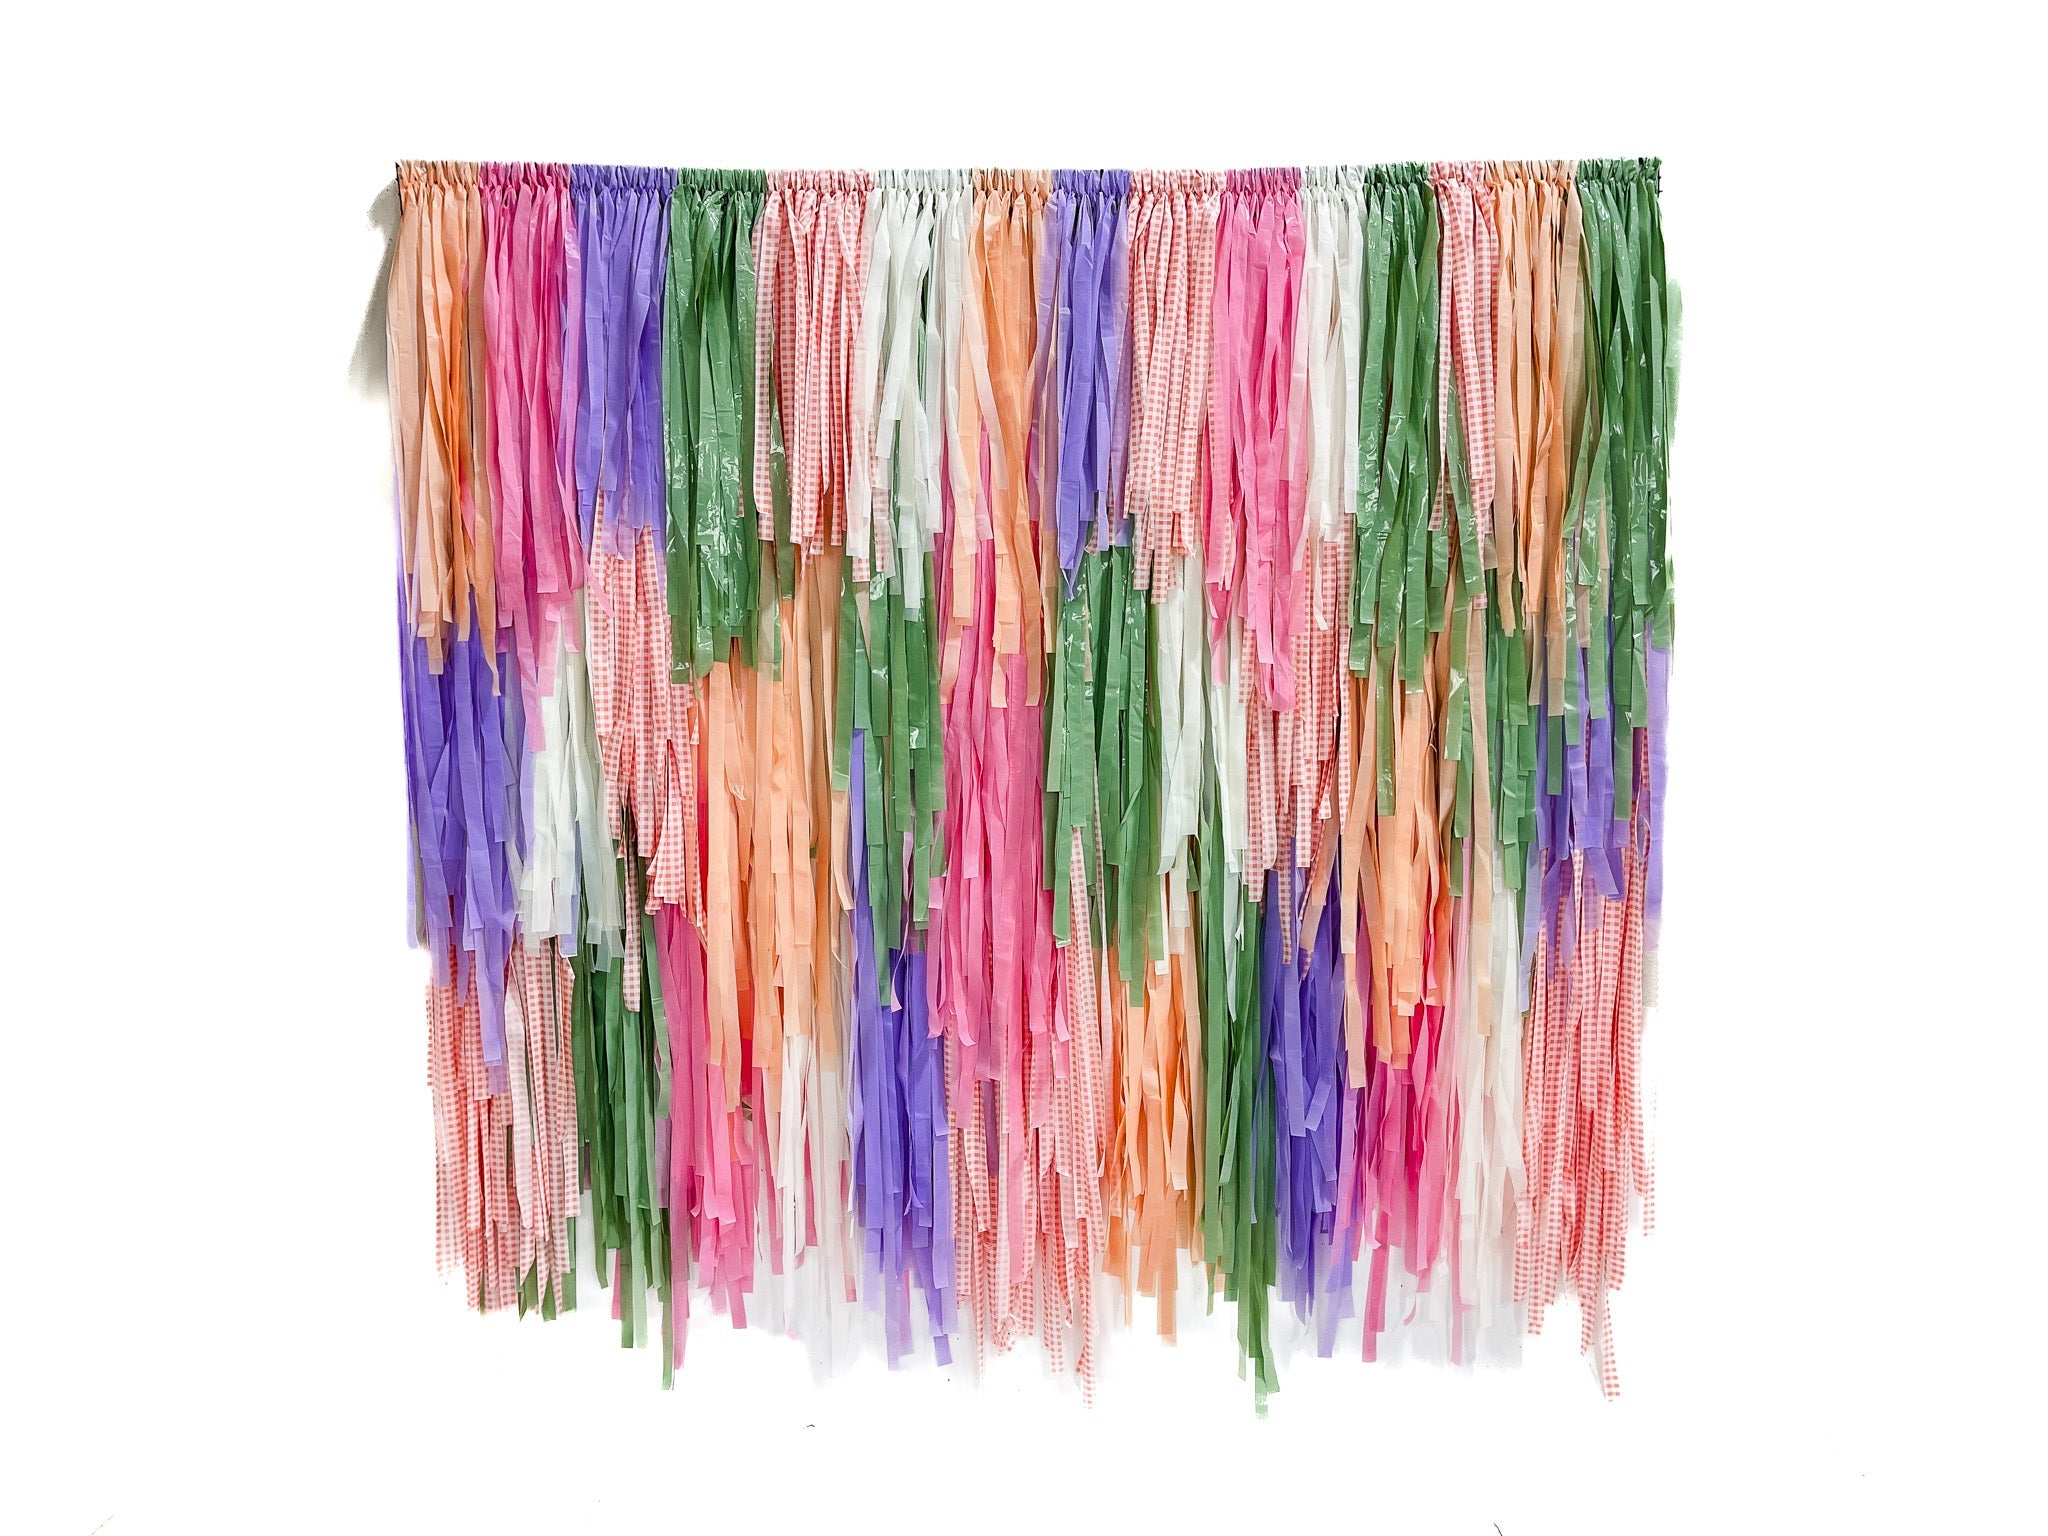 Garden Party Fringe Backdrop - Oh My Darling Party Co-baby pinkbaby showerblush #Fringe_Backdrop#